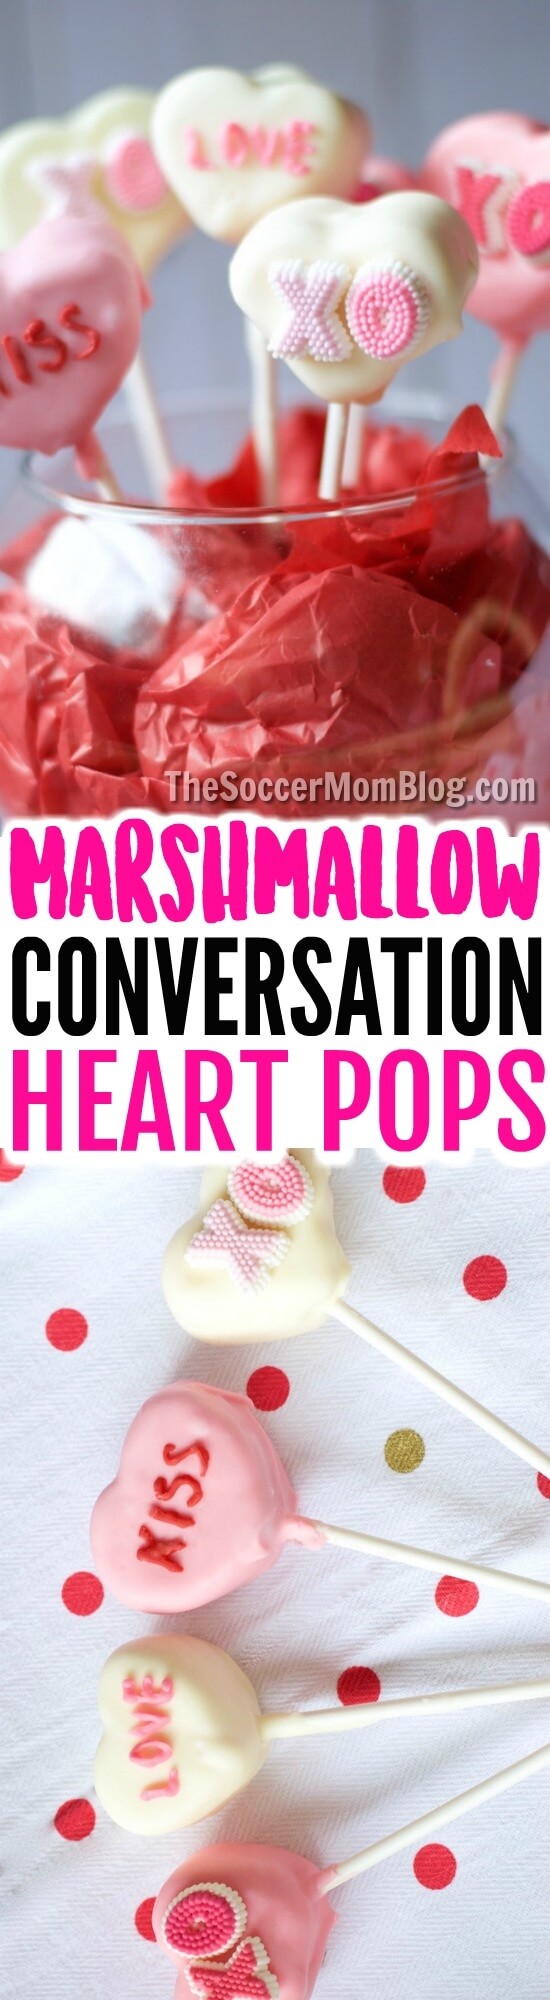 Chocolate-dipped Conversation Heart Marshmallow Pops are easy enough for kids to make and absolutely adorable Valentine's Day gifts!